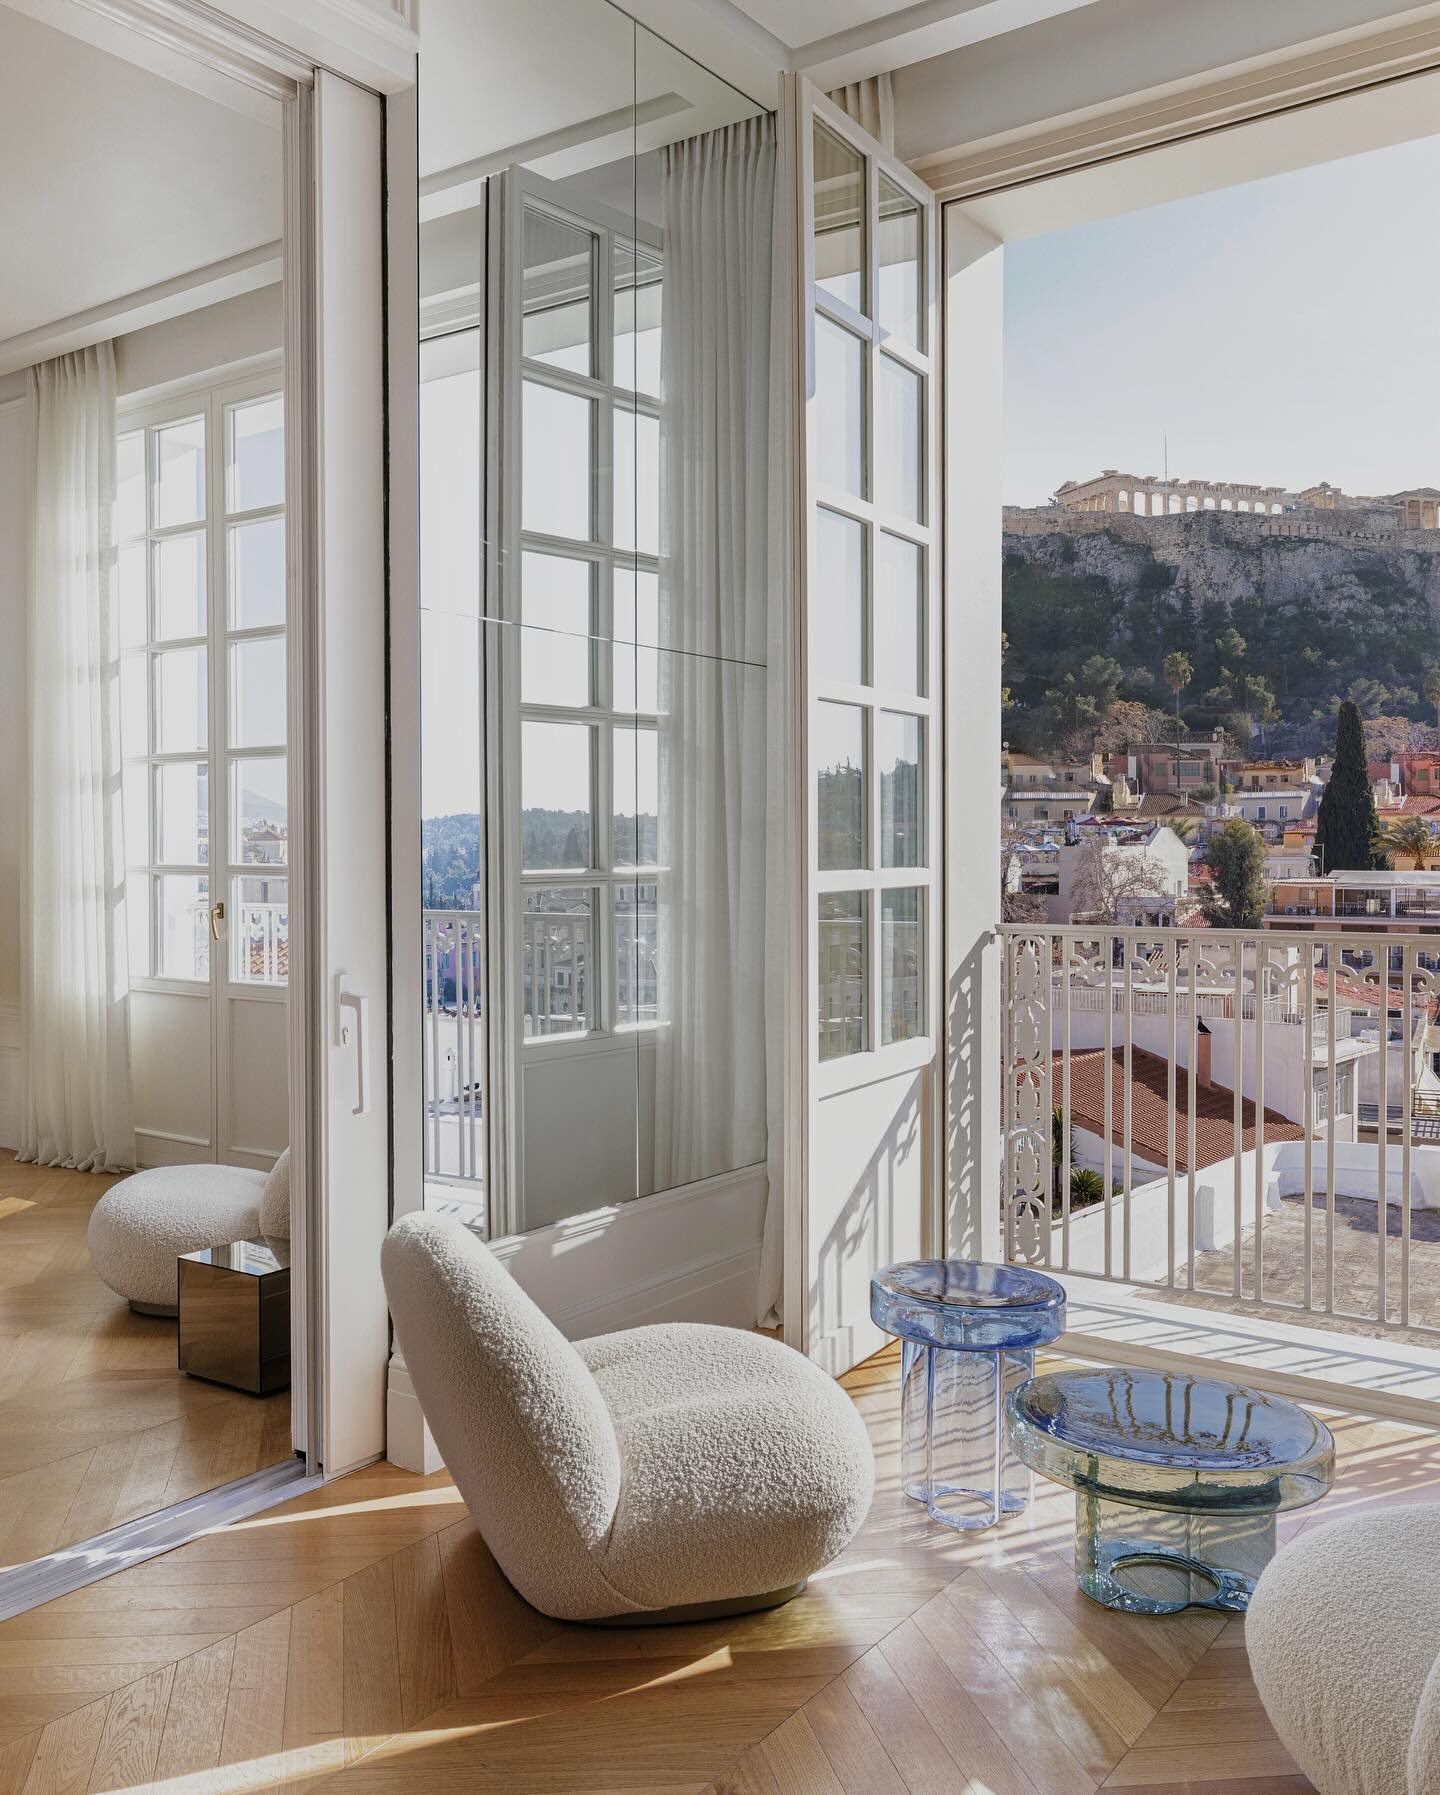 Discover a haven of idyllic charm at @thedolliacropolis in Athens &mdash; just moments away from the iconic Acropolis, this boutique hotel offers a retreat from the bustling city streets. Spend the day lounging poolside or enjoying a cocktail at the 